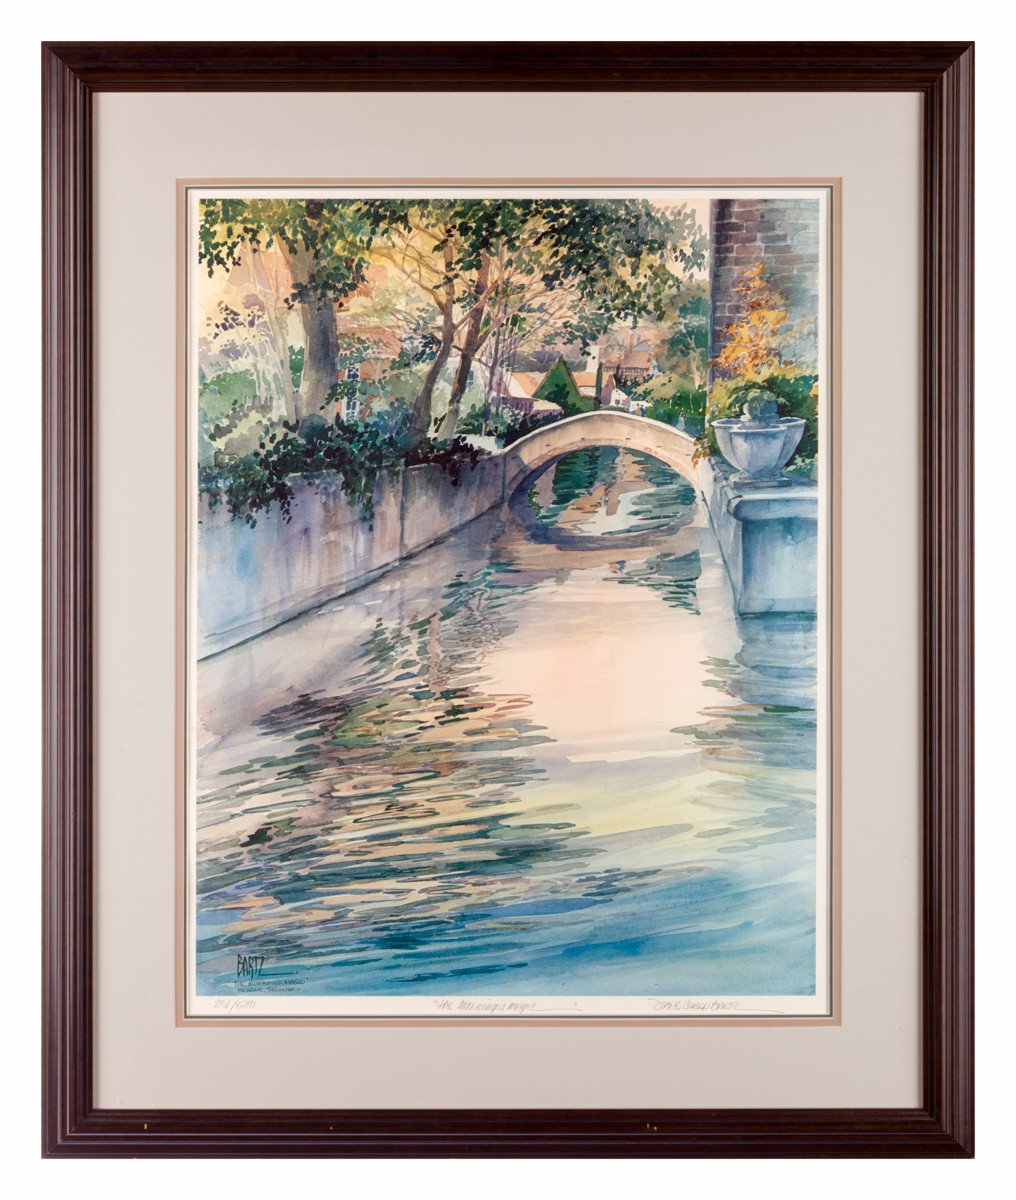 Morning's Magic - by Diane Clapp Bartz (Signed Lithograph) - Framed Art